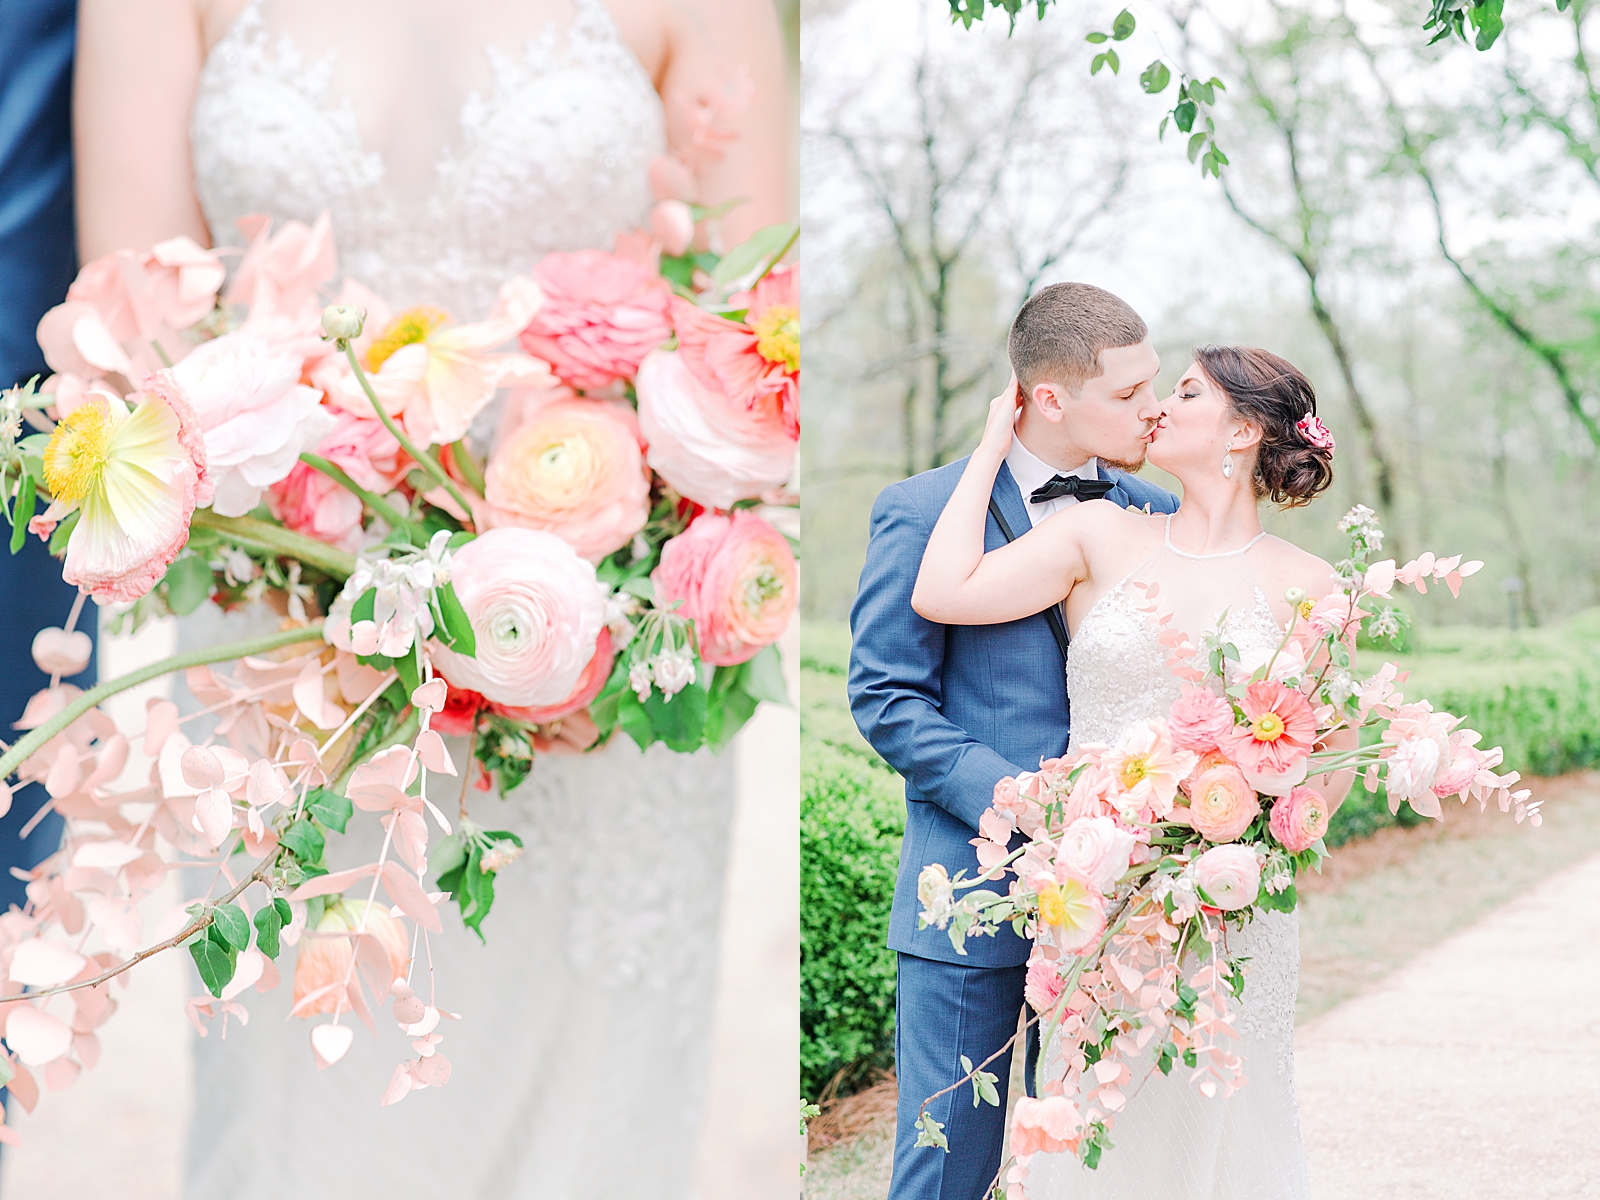 Wedding at 2400 On The River Brides bouquet and couple kissing Photos